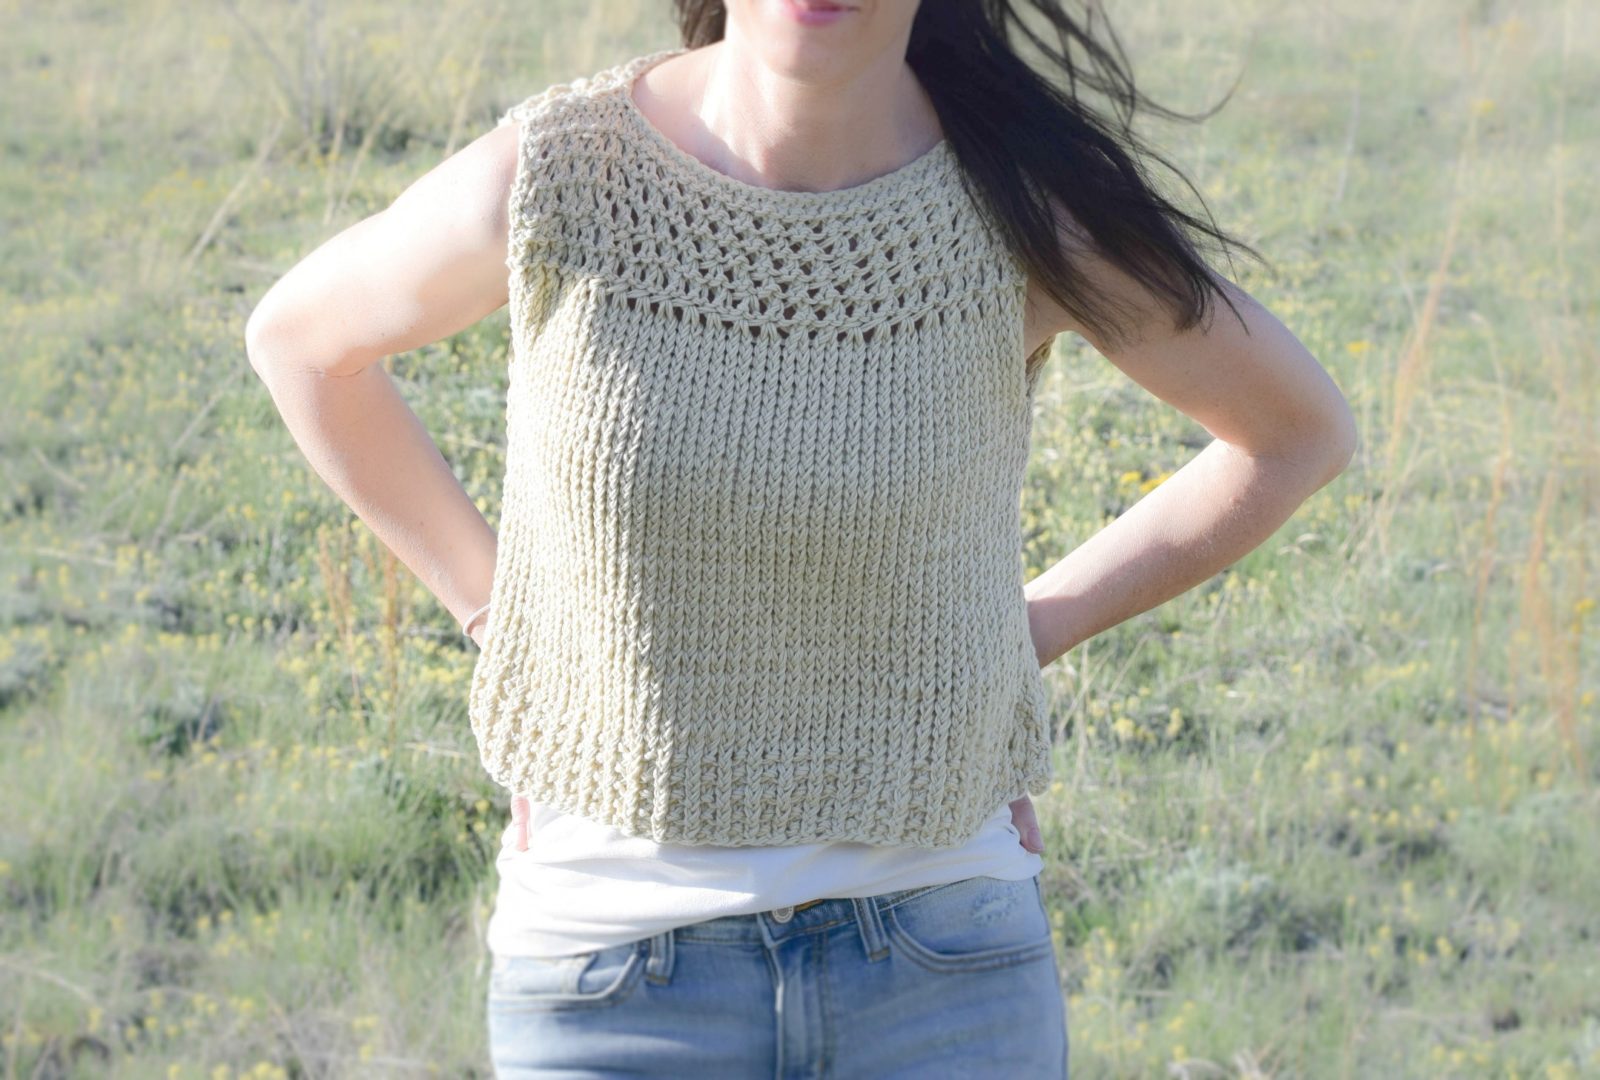 How to shape armholes in knitting - Gathered